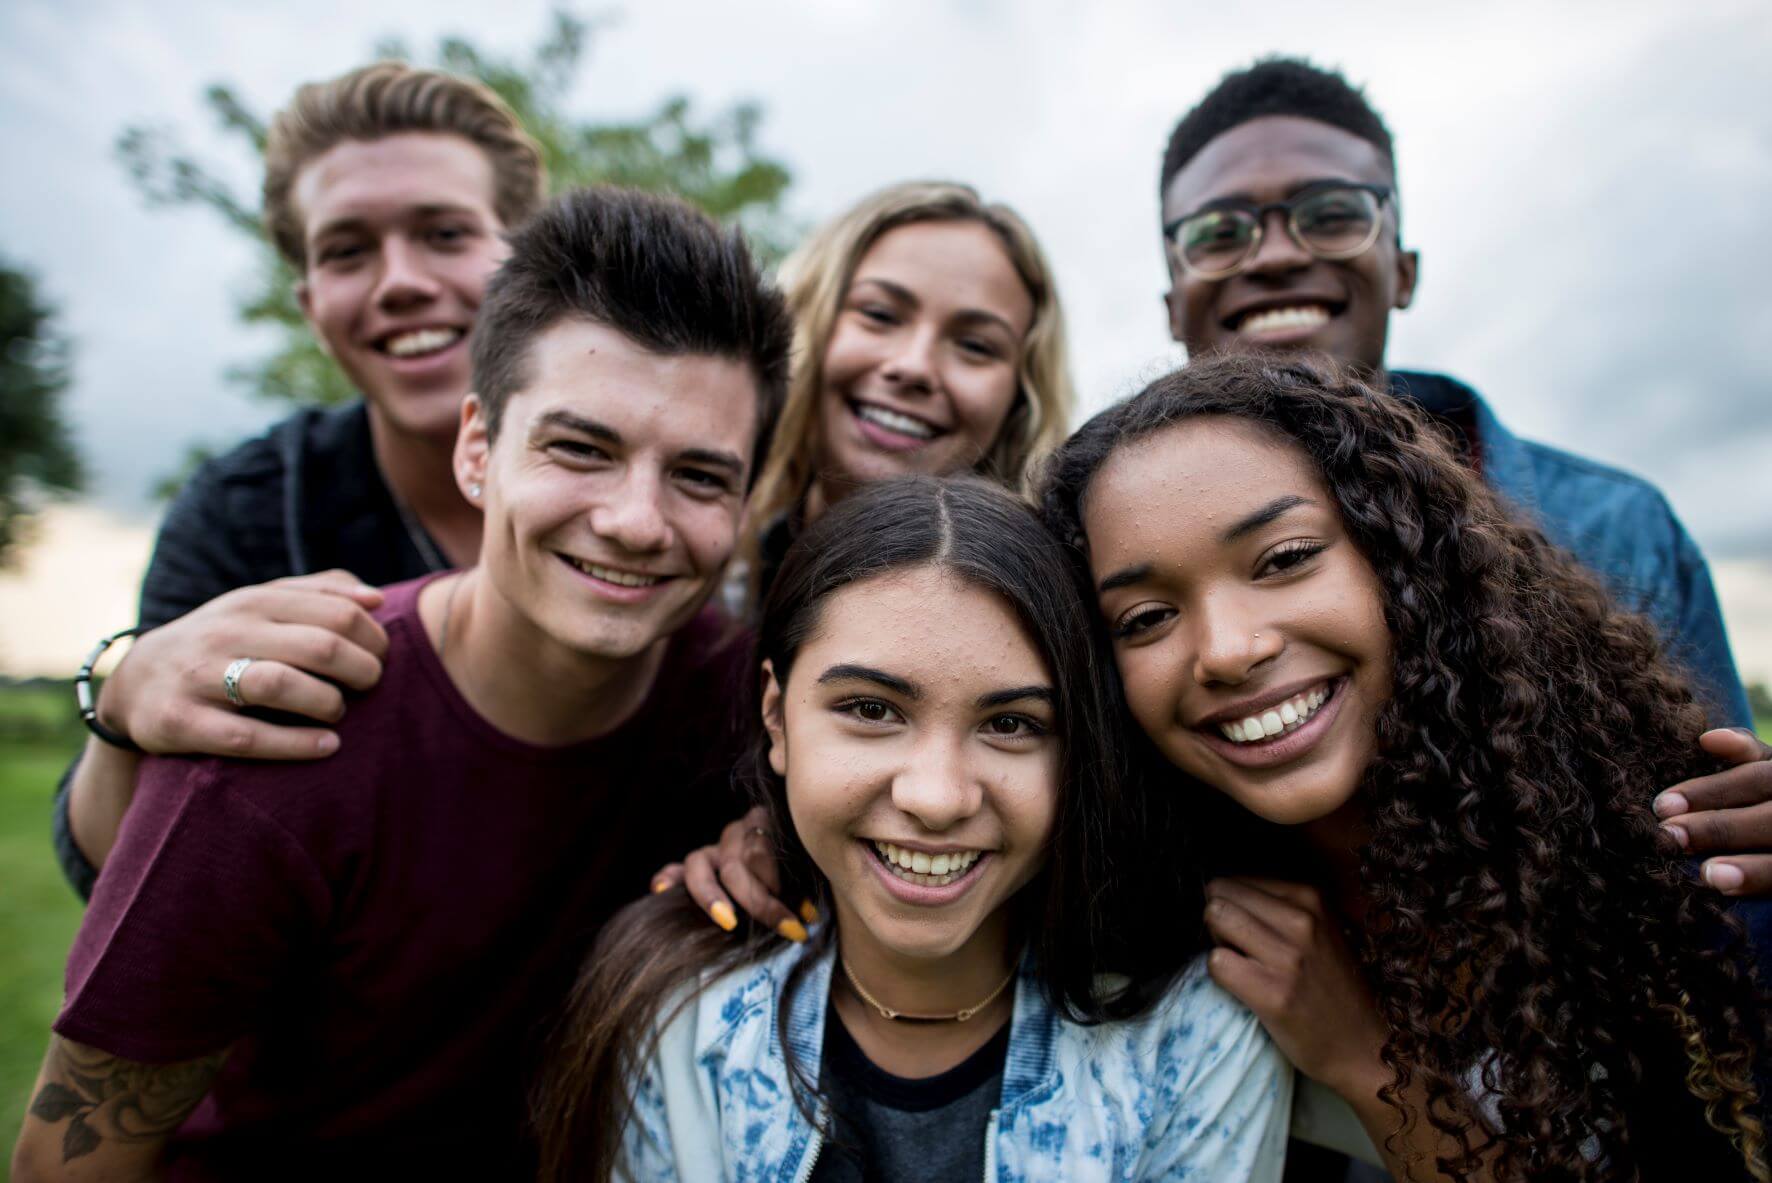 Teen Prevention Coalition - Council on Chemical Abuse | Your Bridge to Addiction Resources